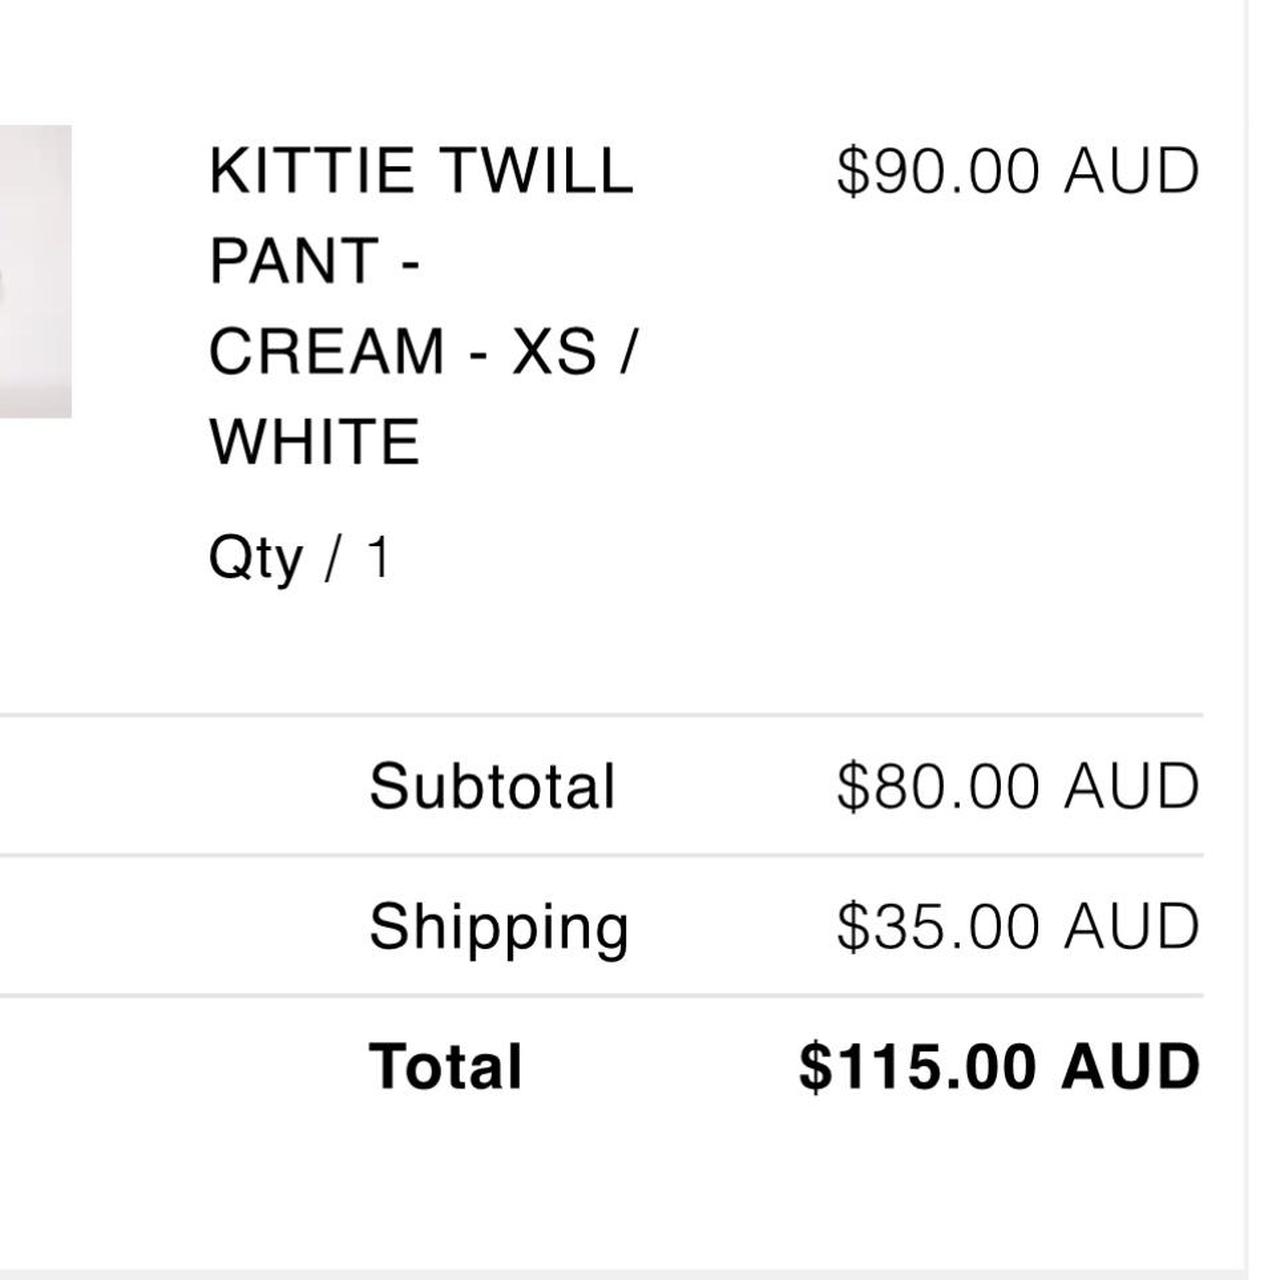 Tiger Mist Kittie Twill Pant White Brand New with... - Depop